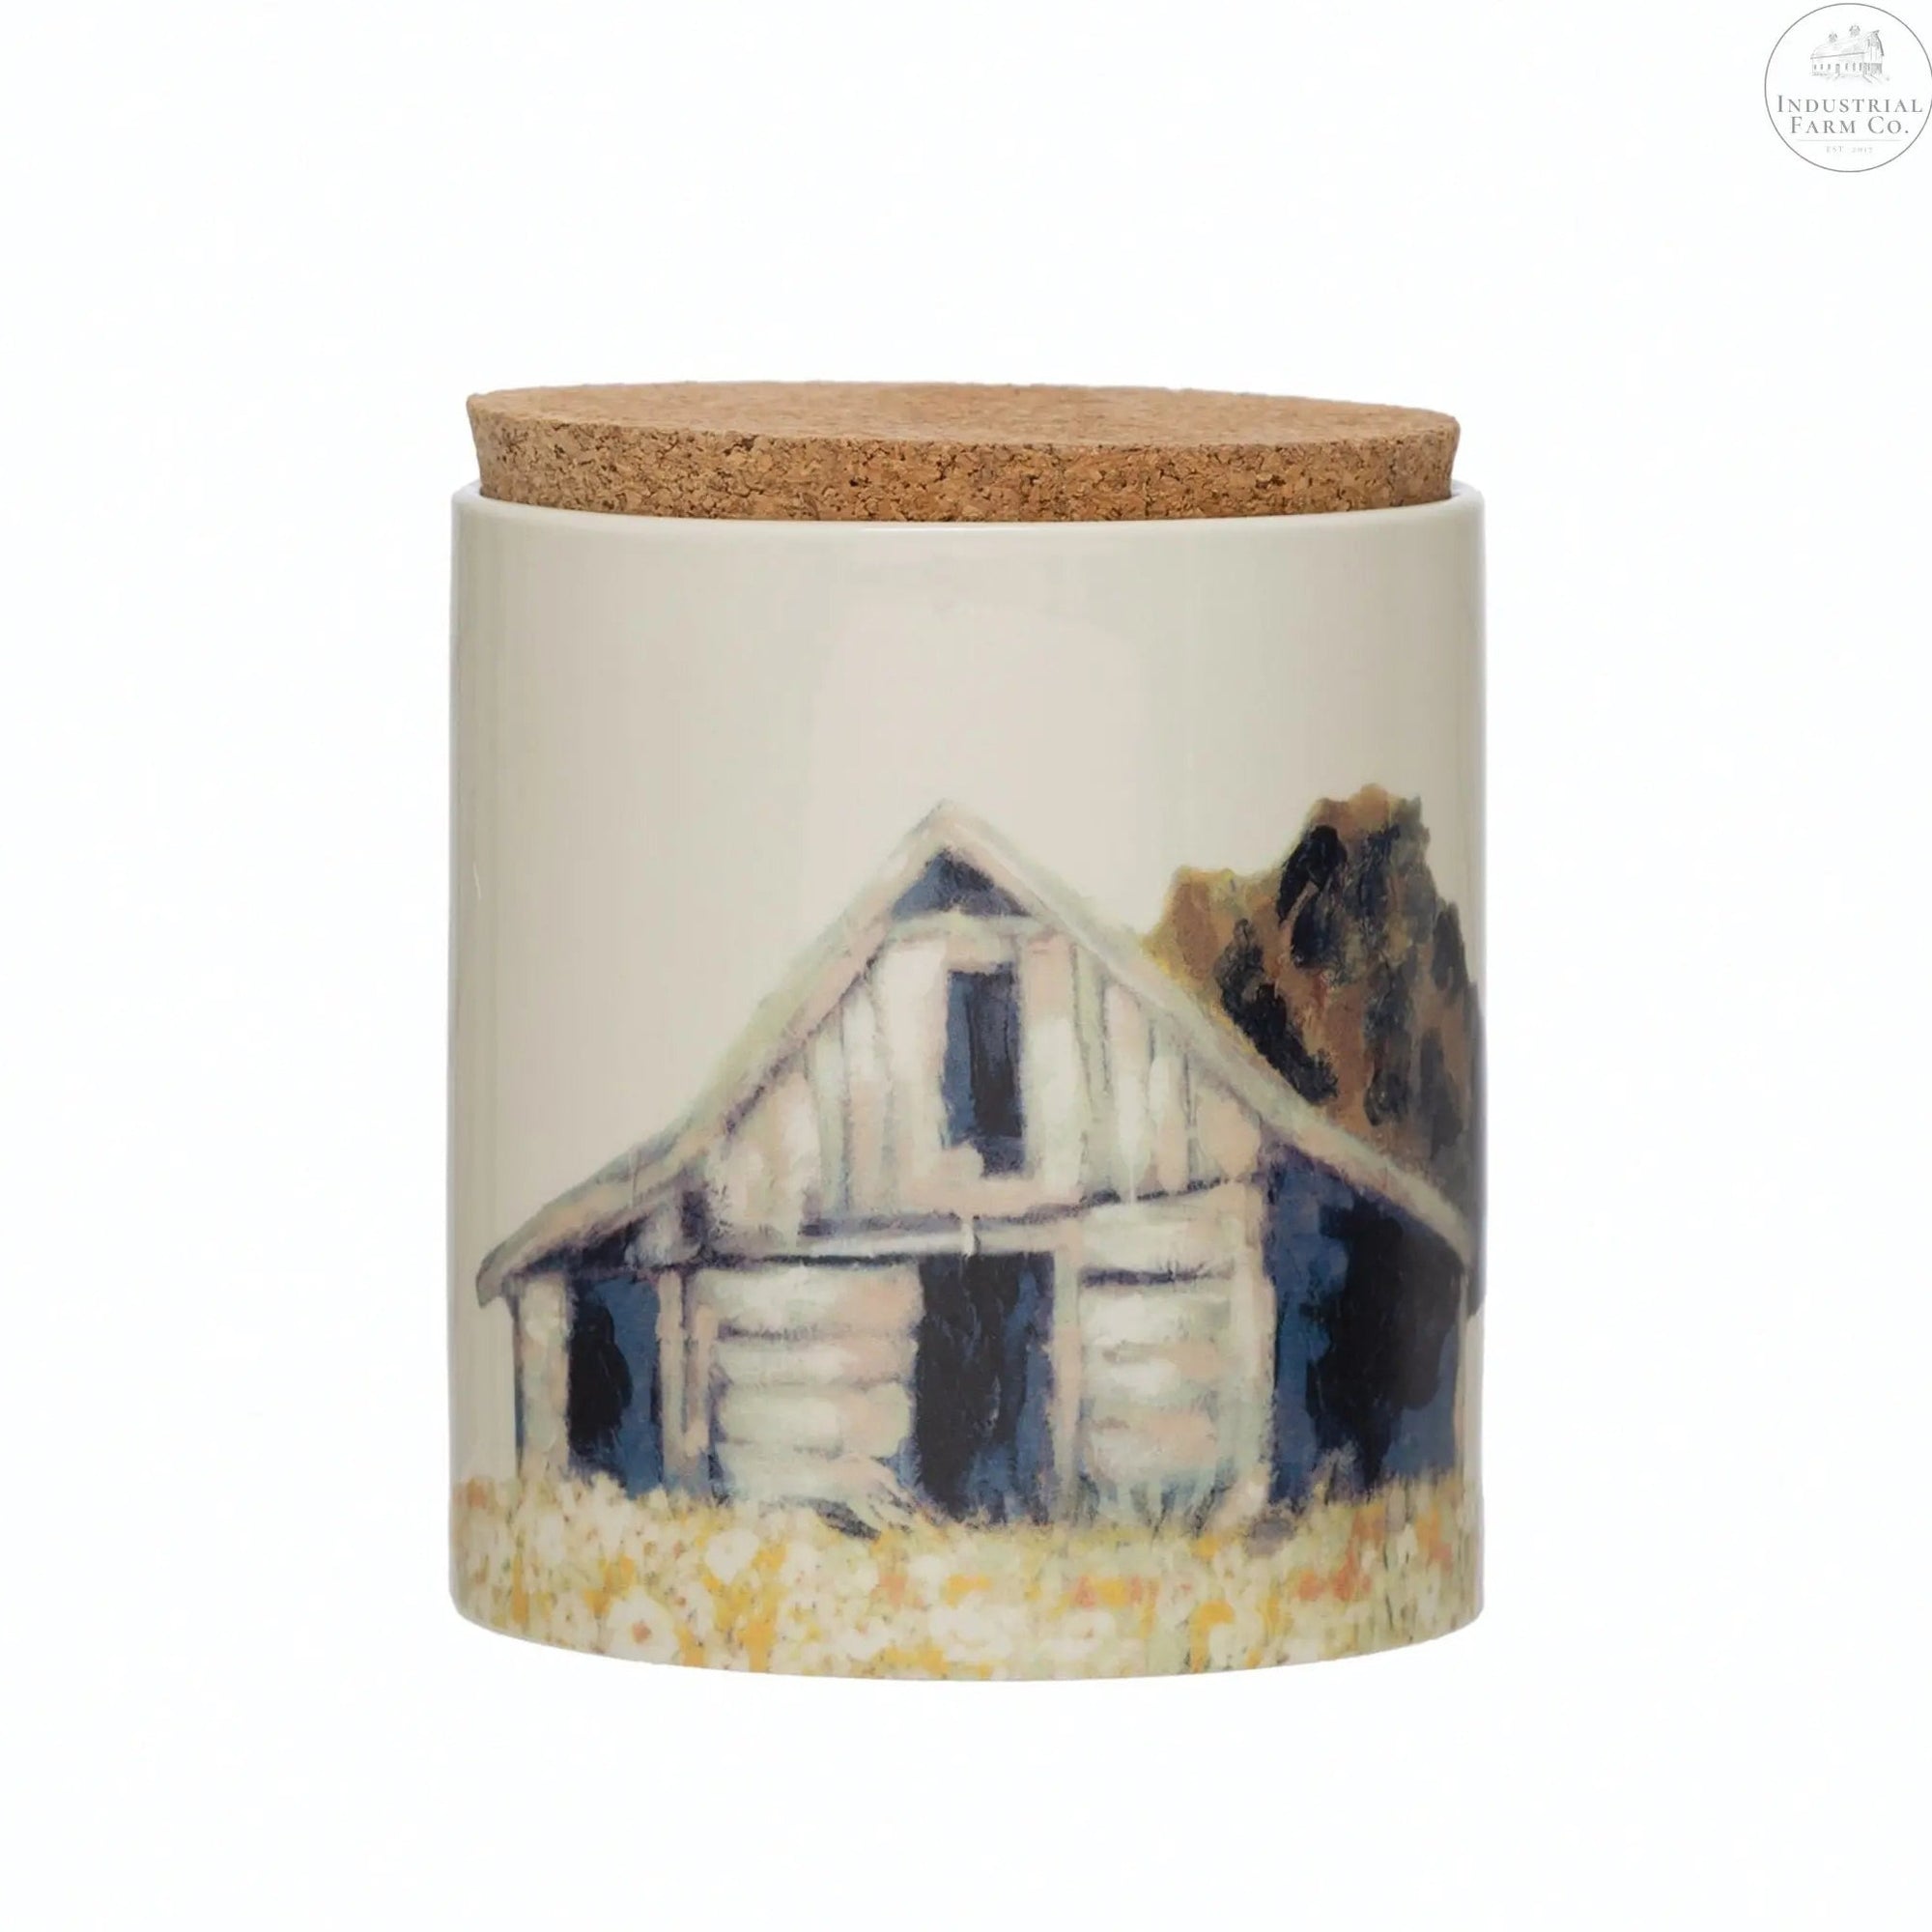 On The Farm Stoneware Canister     | Industrial Farm Co